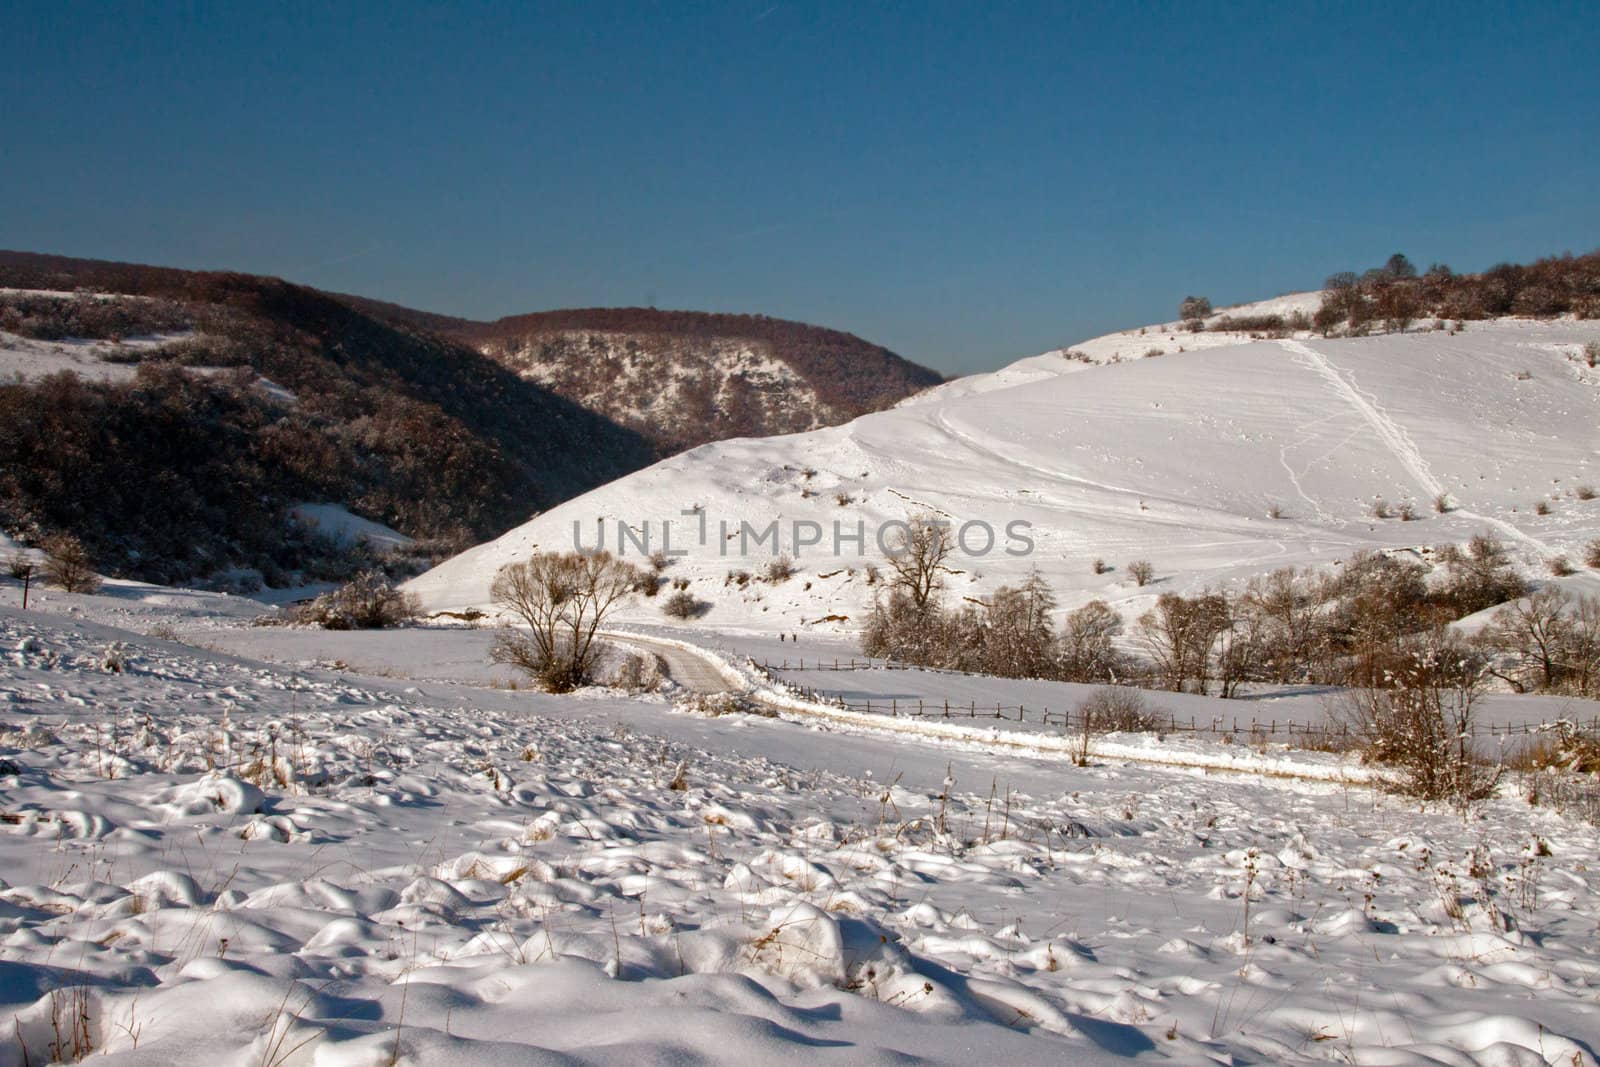 A lonely, snow-covered valley in winter